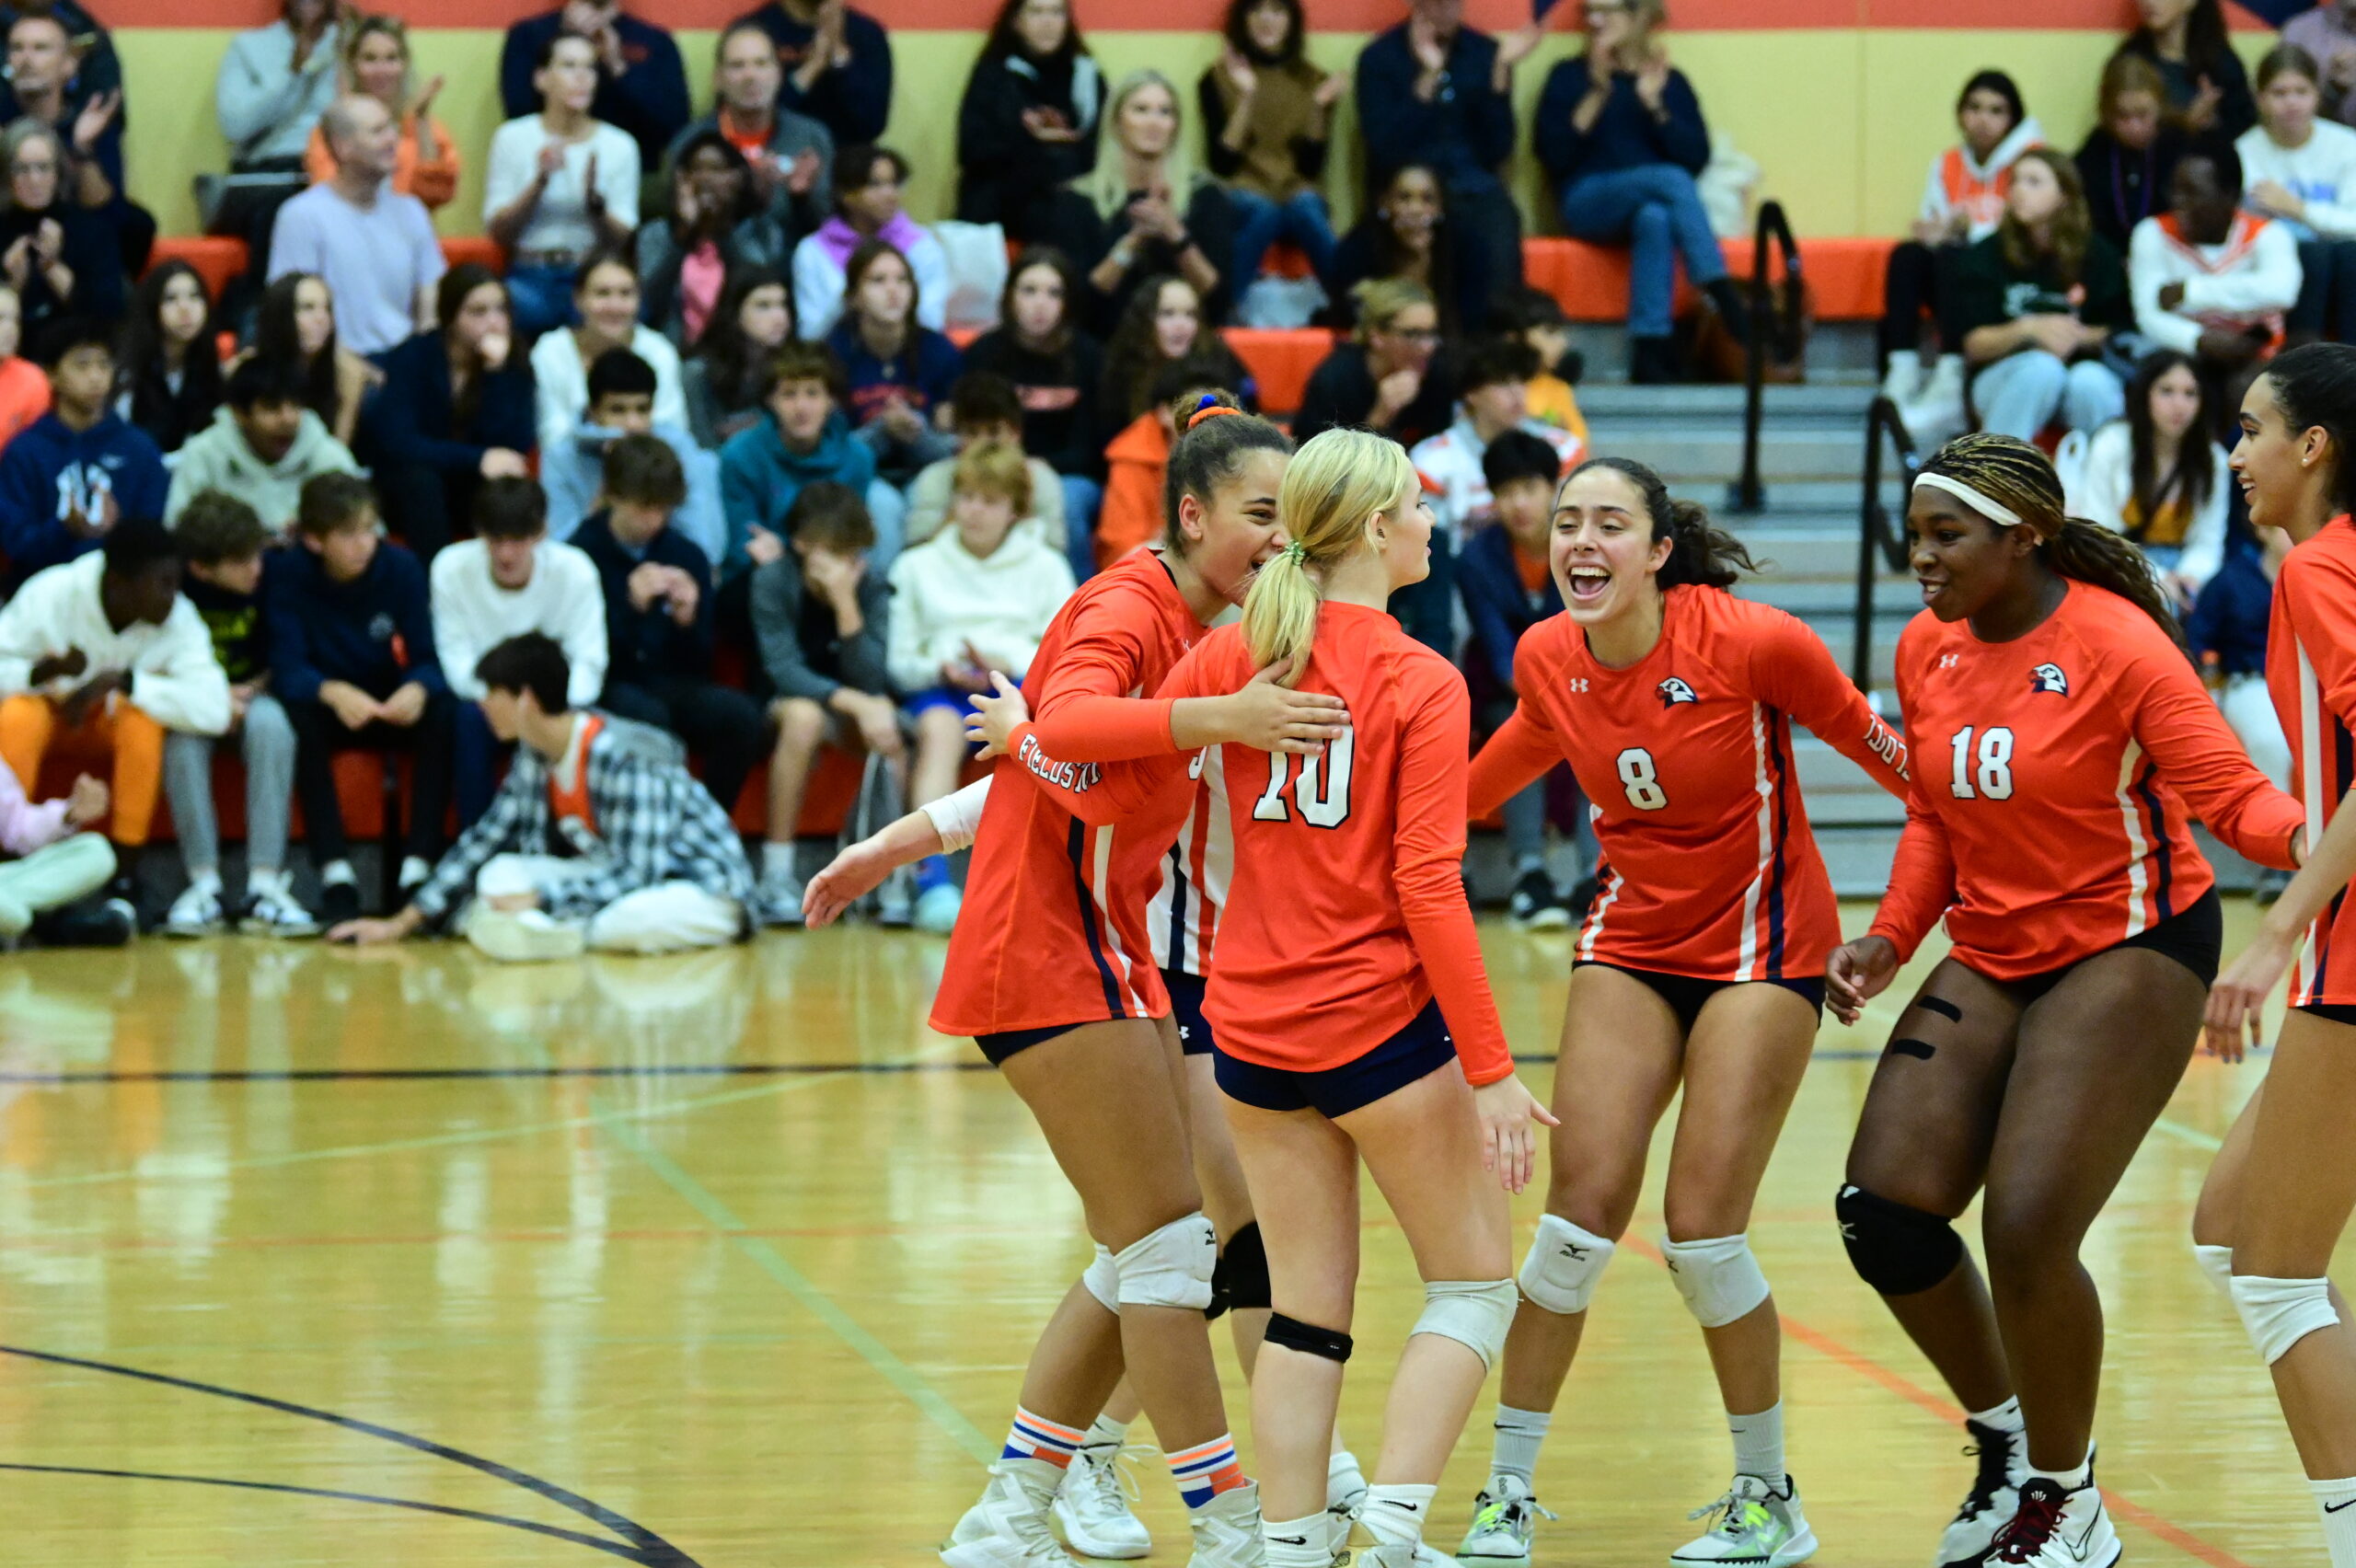 Volleyball players celebrate a point at Homecoming